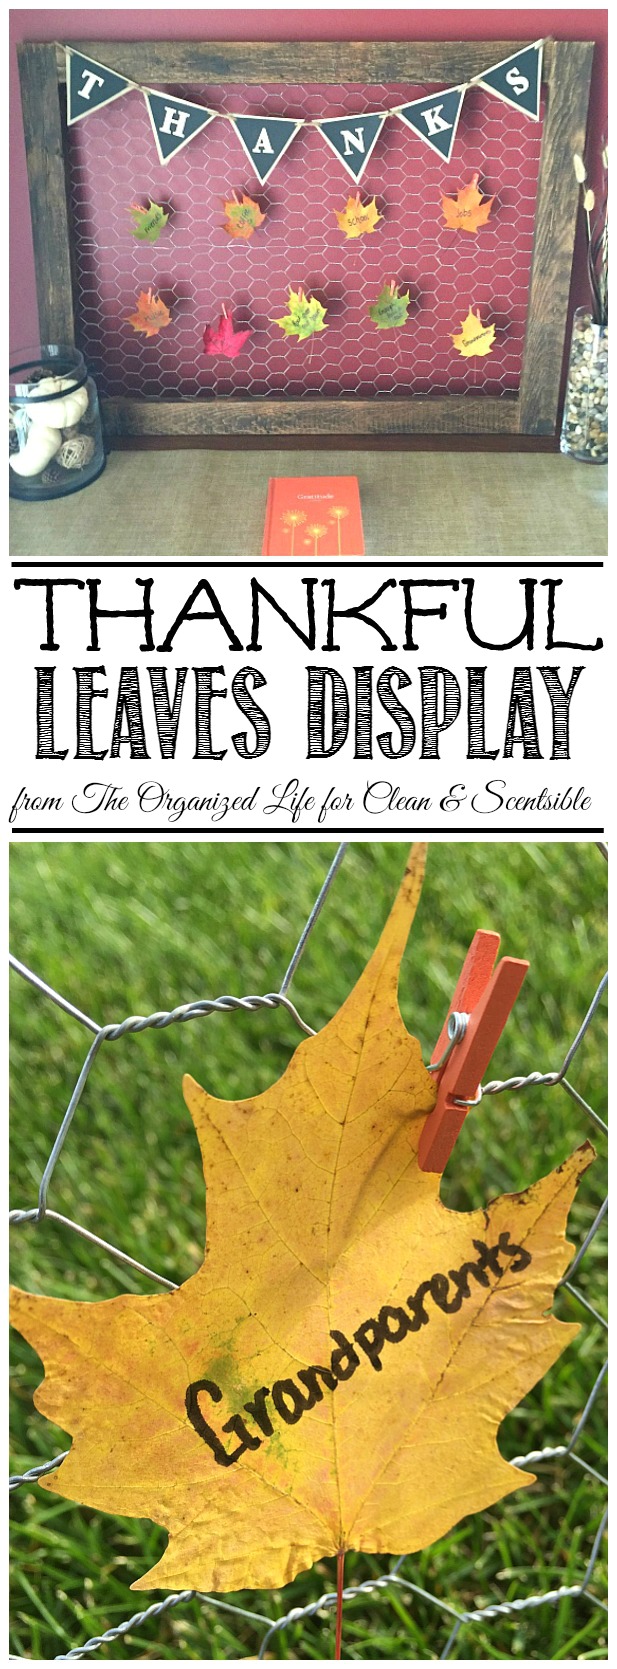 This thankful leaves display is such a sweet idea for Thanksgiving and a great reminder of all we have to be thankful for!